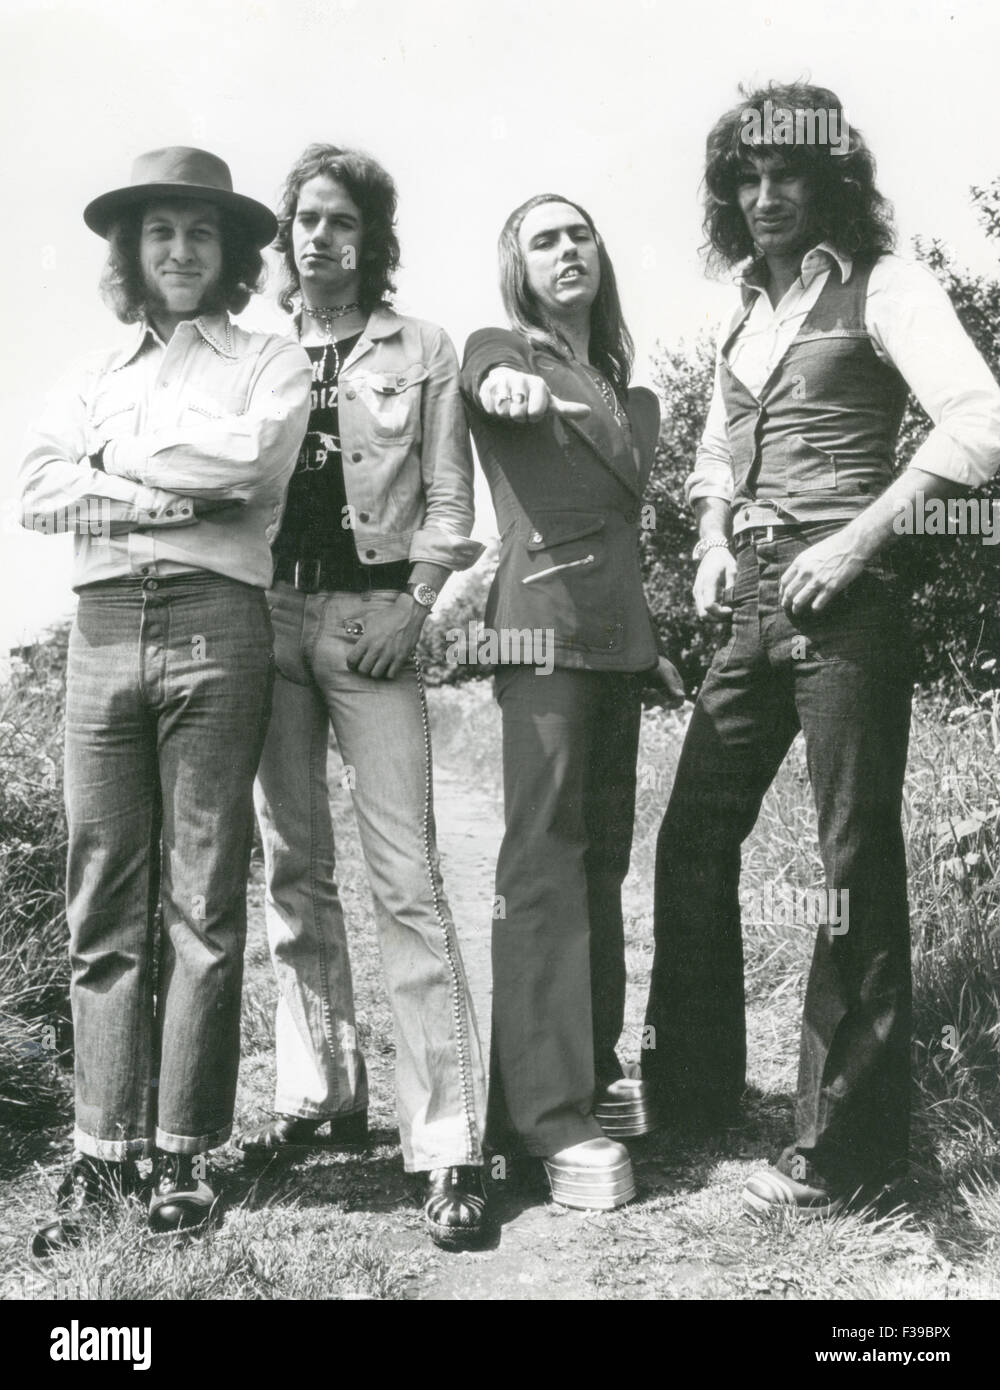 SLADE UK pop group about 1973. From left: Noddy Holder, Jim Lea, Dave Hill, Don Powell Stock Photo